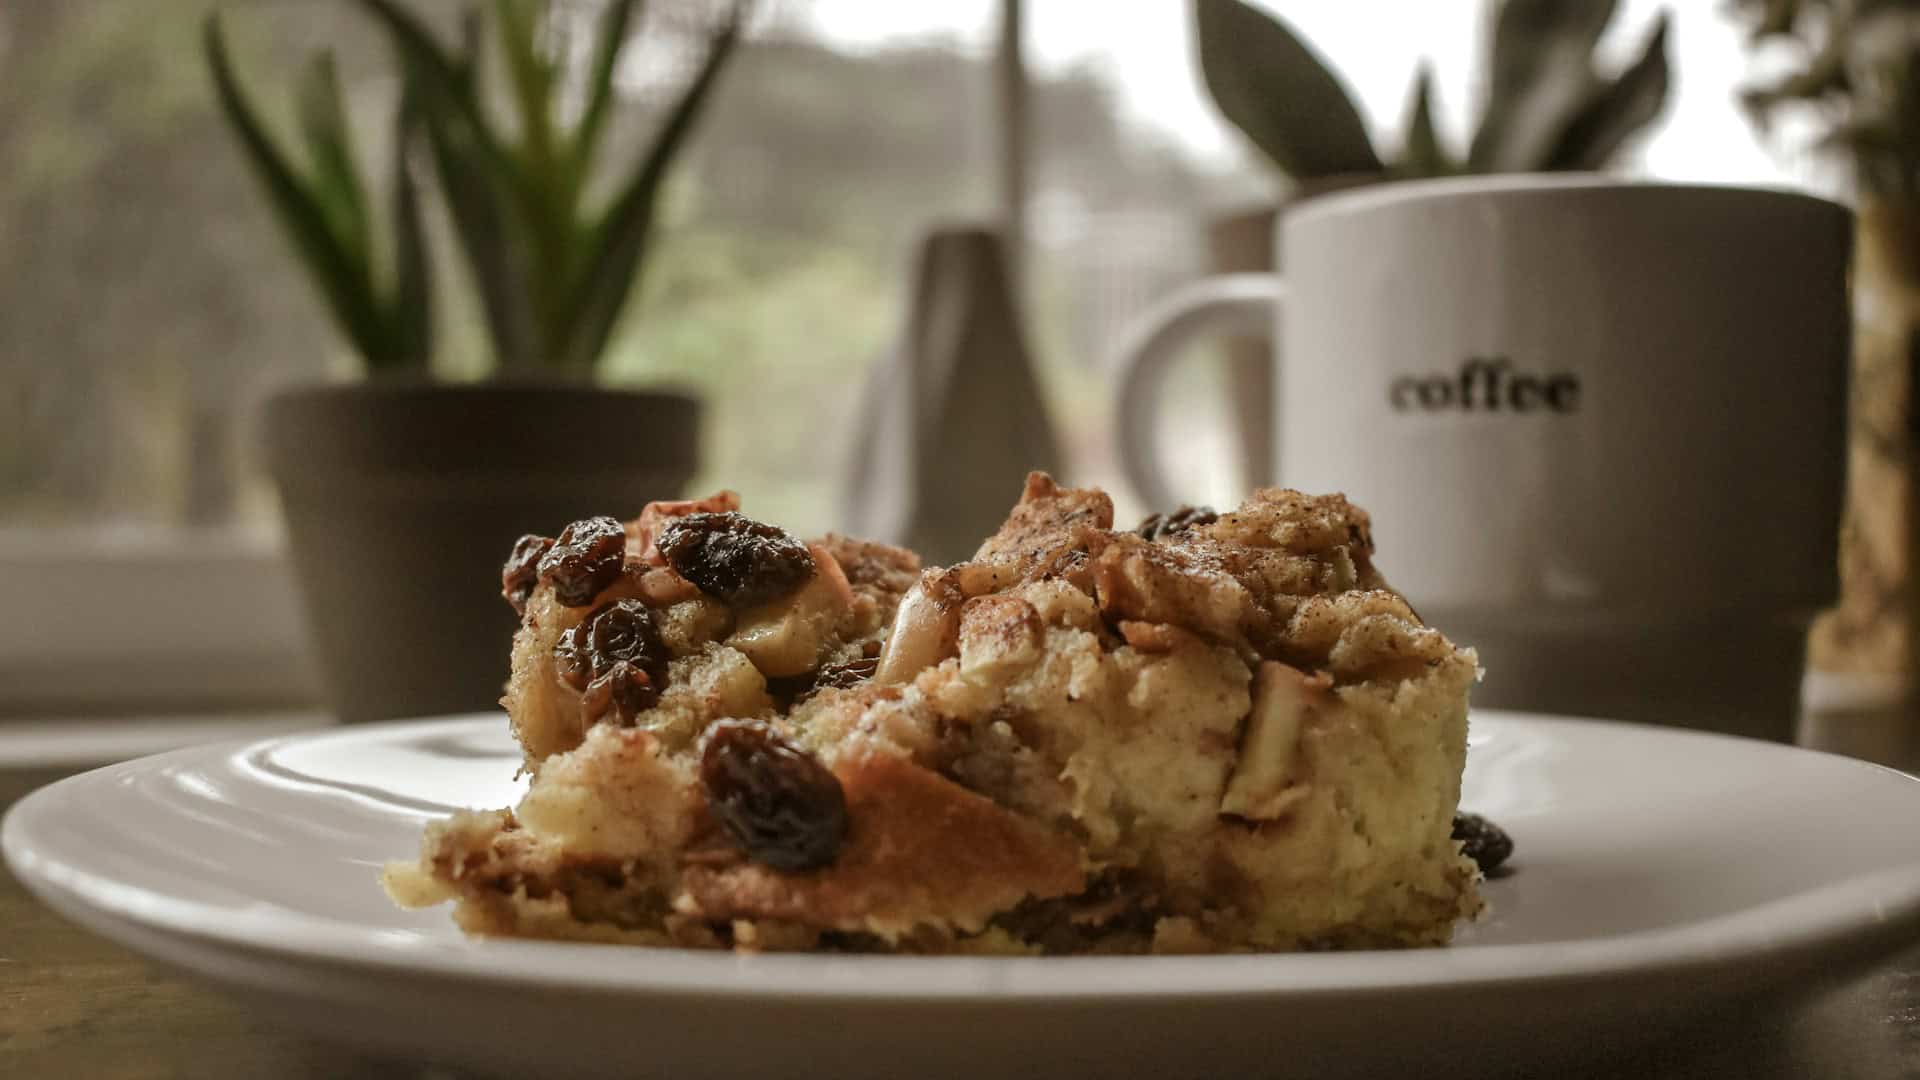 How To Make: Bread Pudding